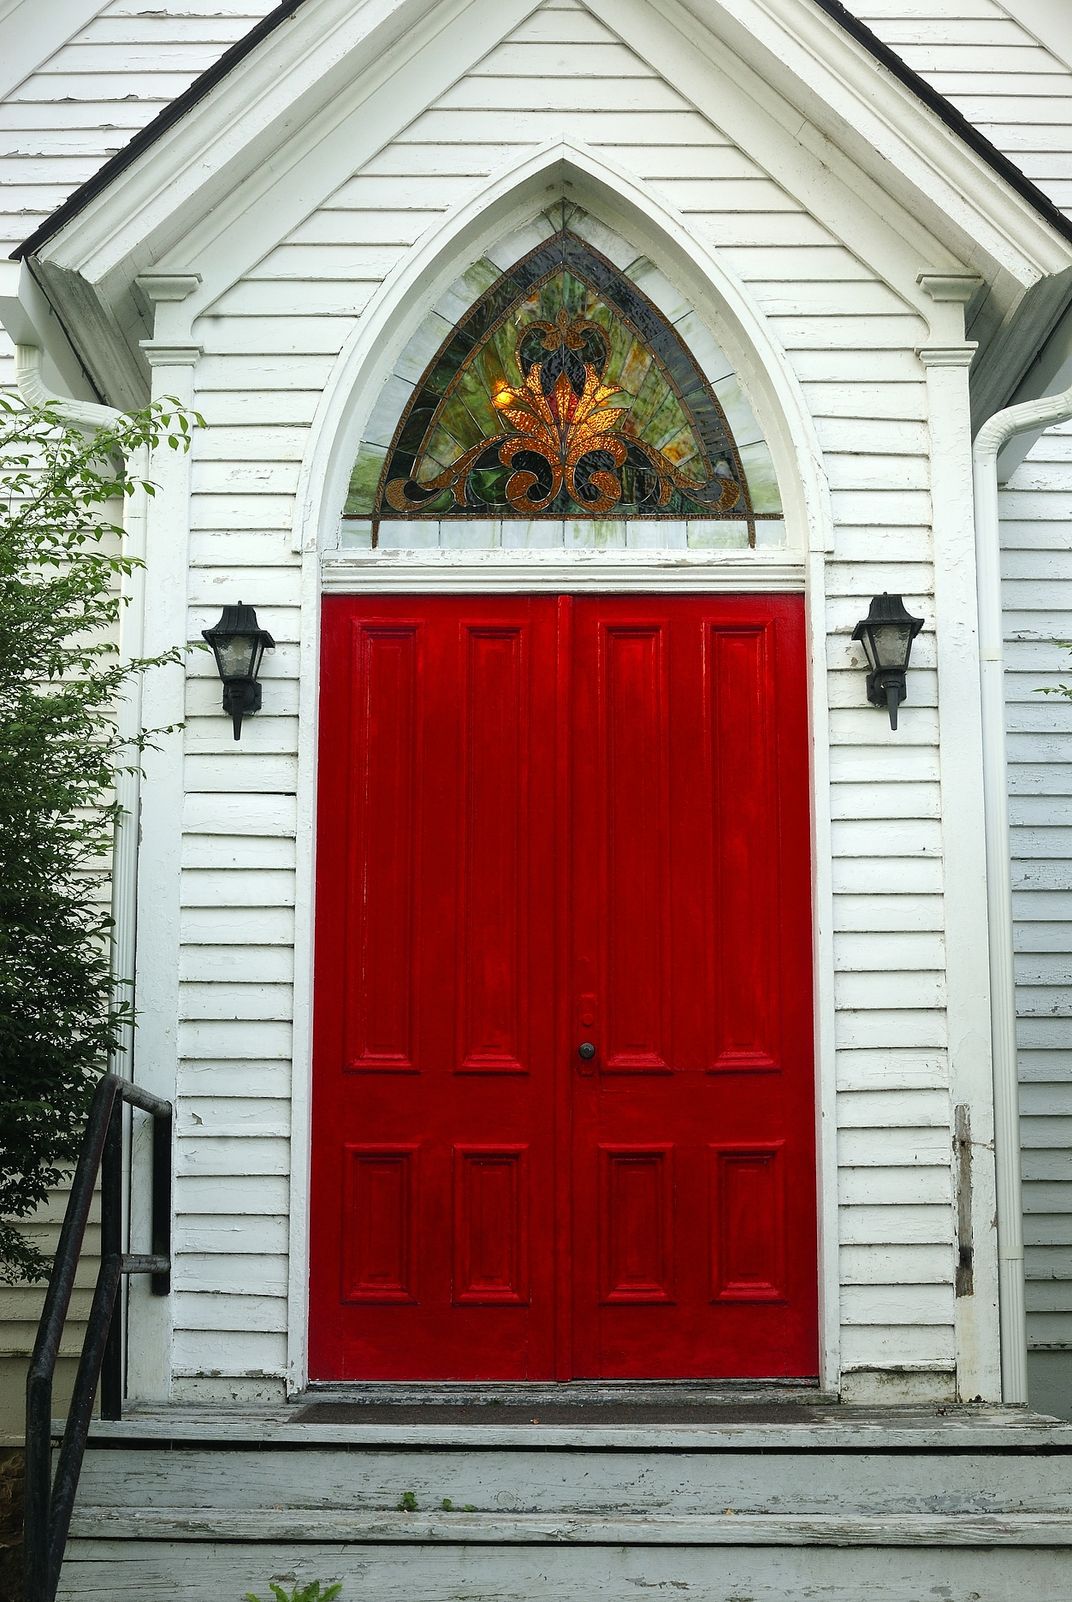 Country church with red door | Smithsonian Photo Contest 